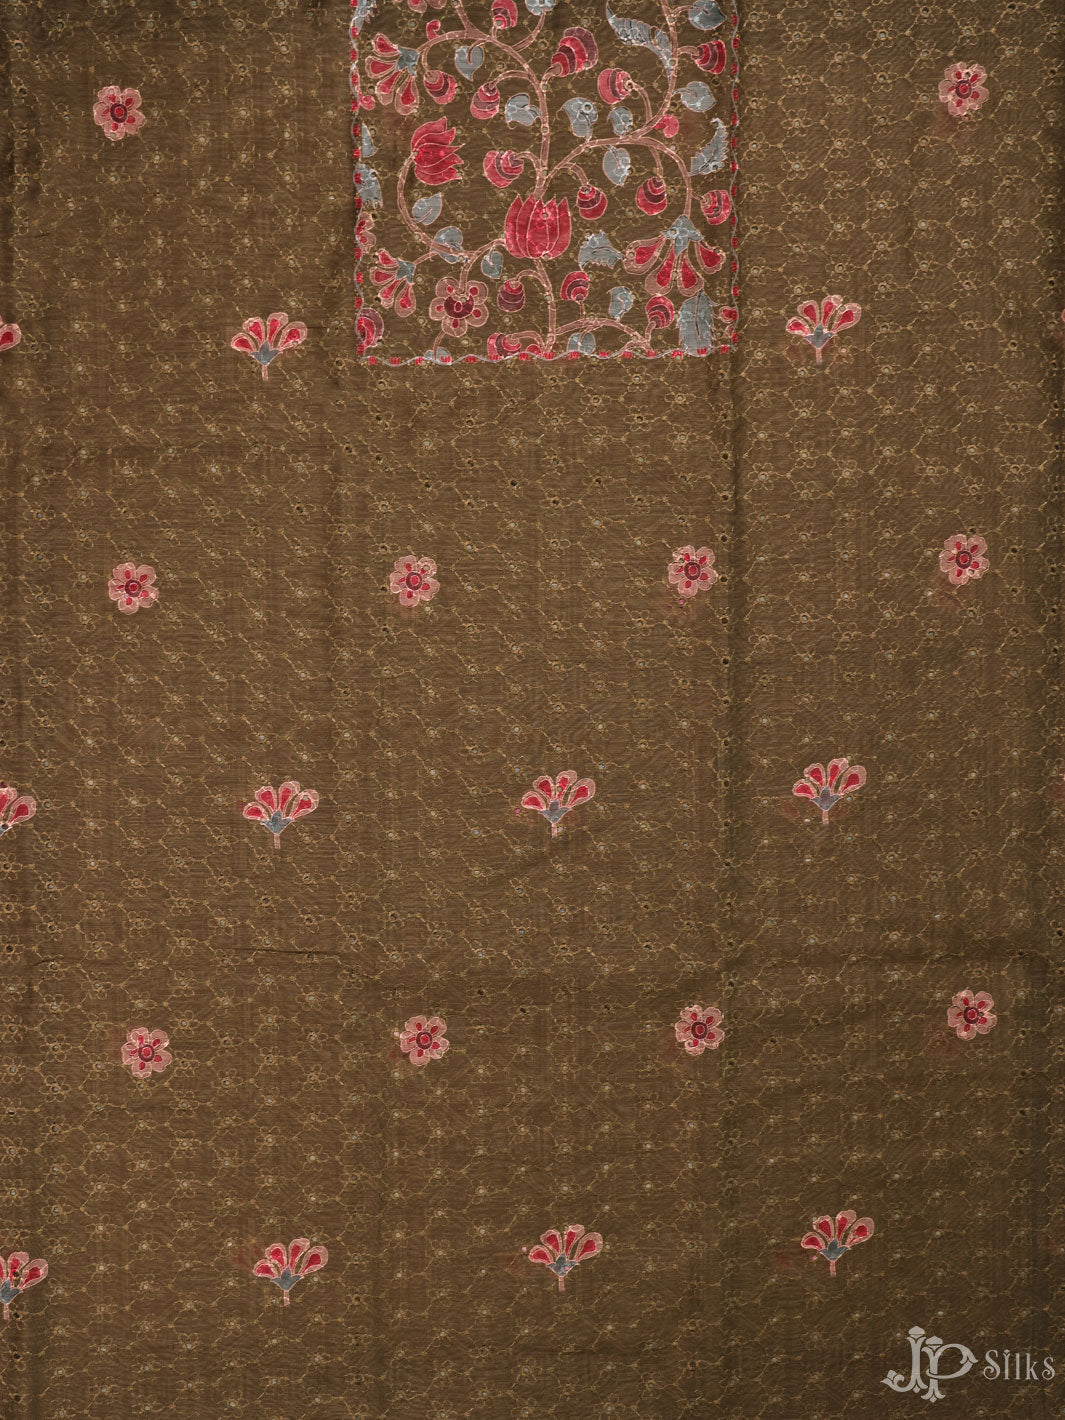 Brown Tussar Unstiched Chudidhar Material - E1902 - View 5